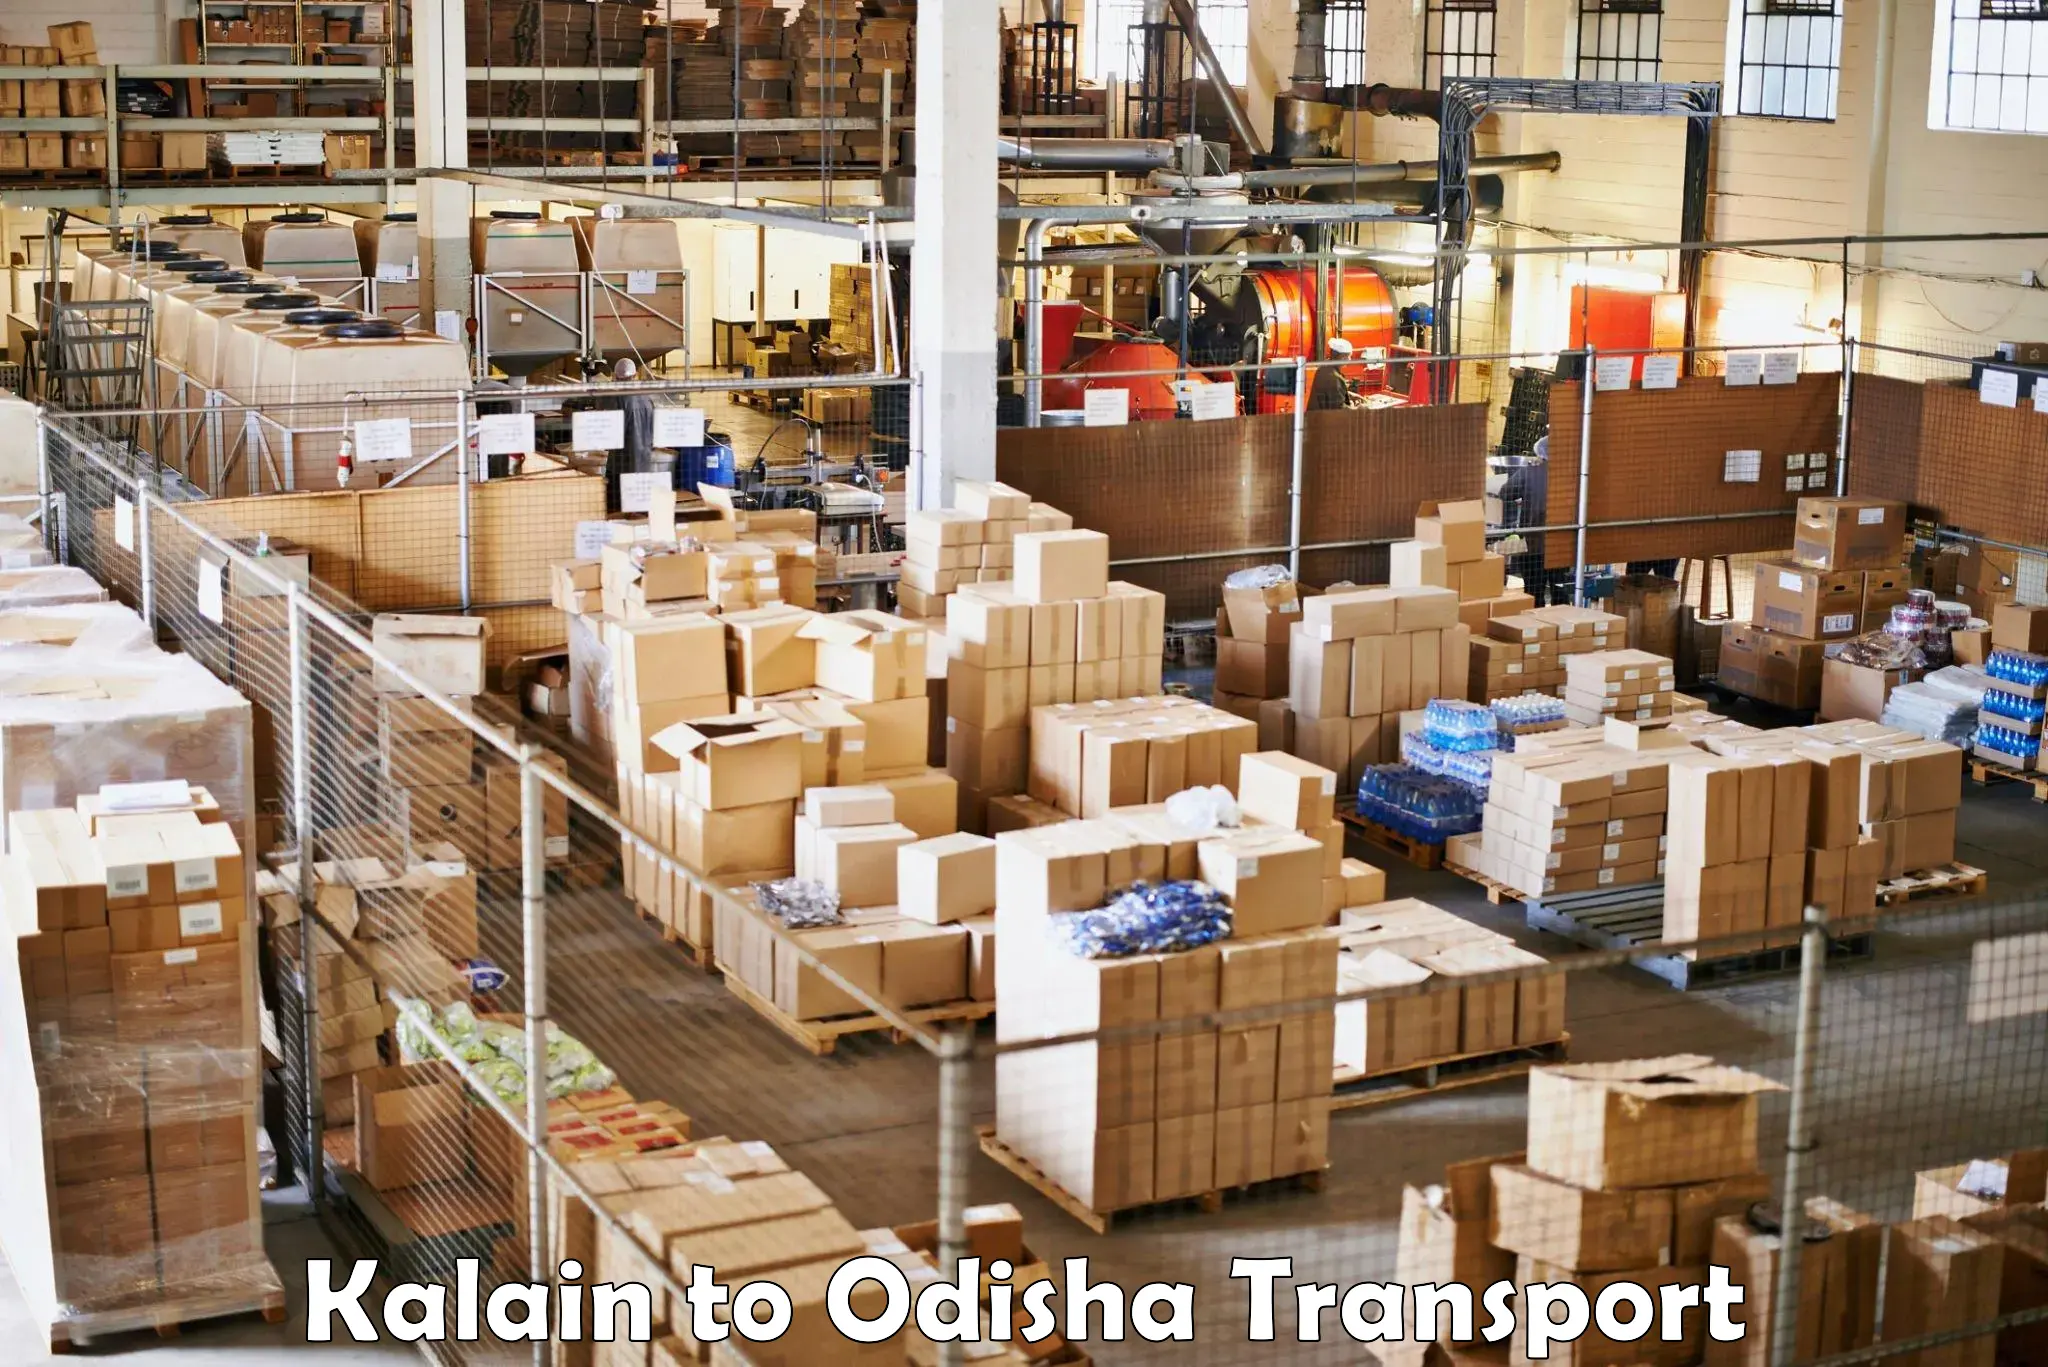 Express transport services in Kalain to Keonjhar